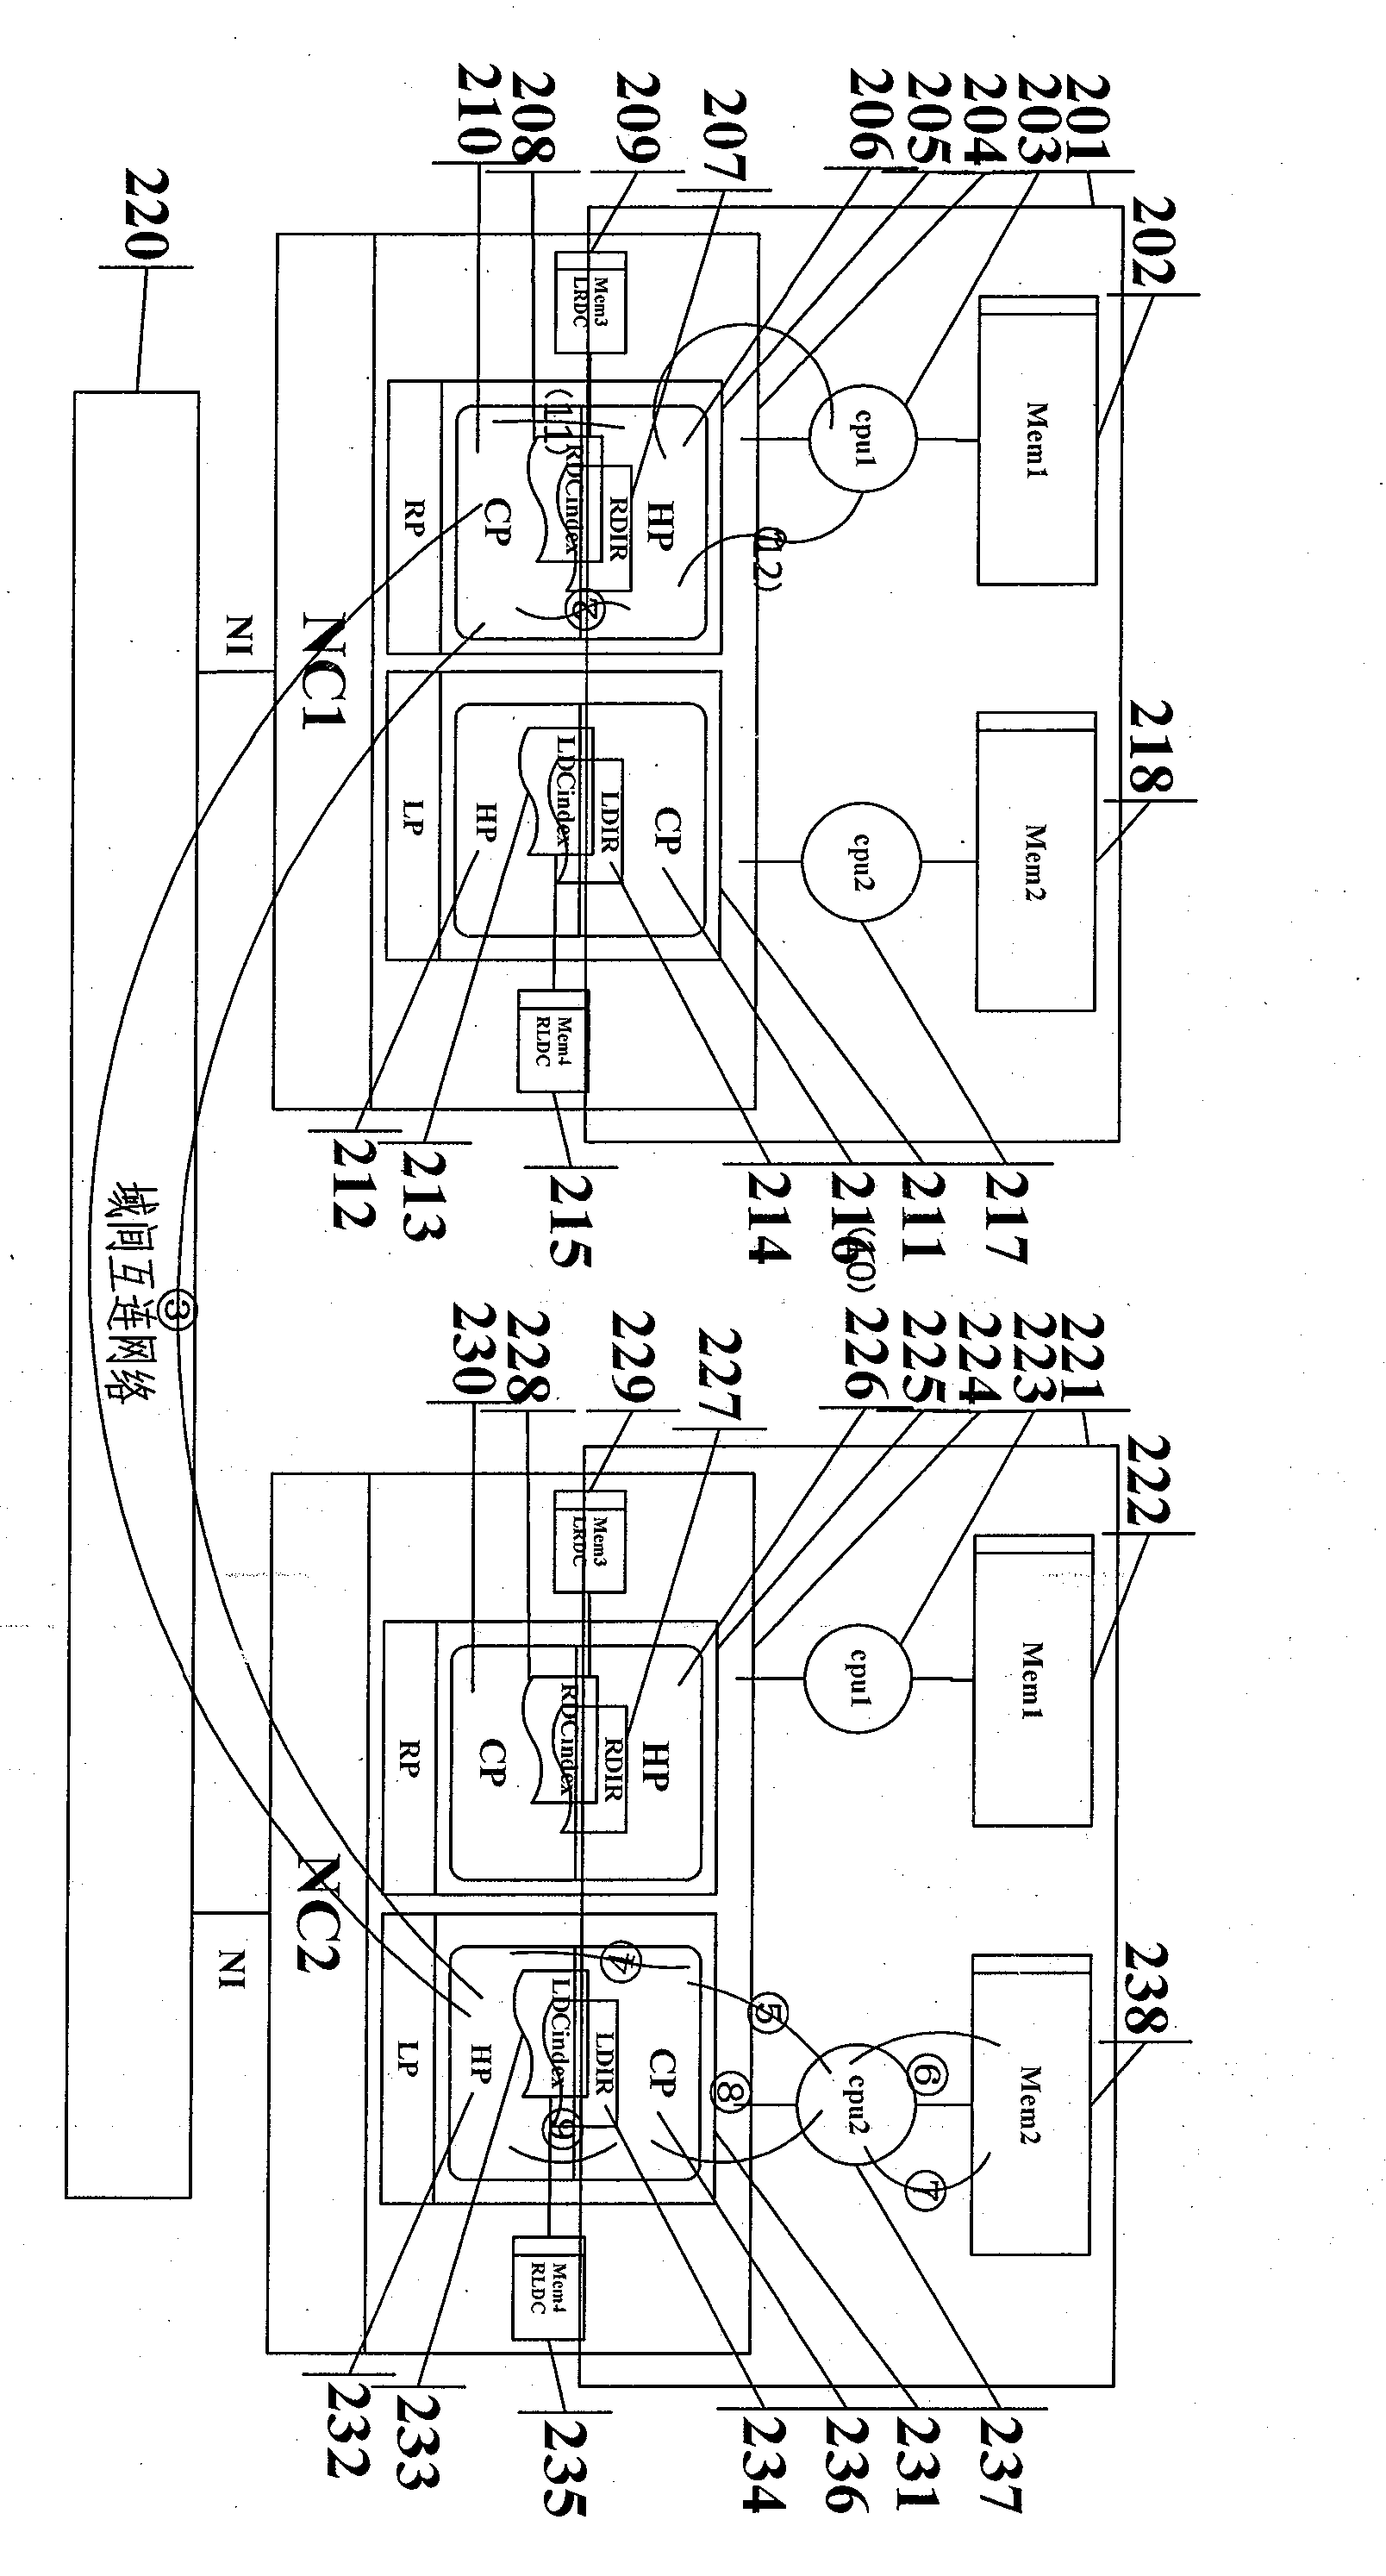 Server node data cache method based on limited data consistency state